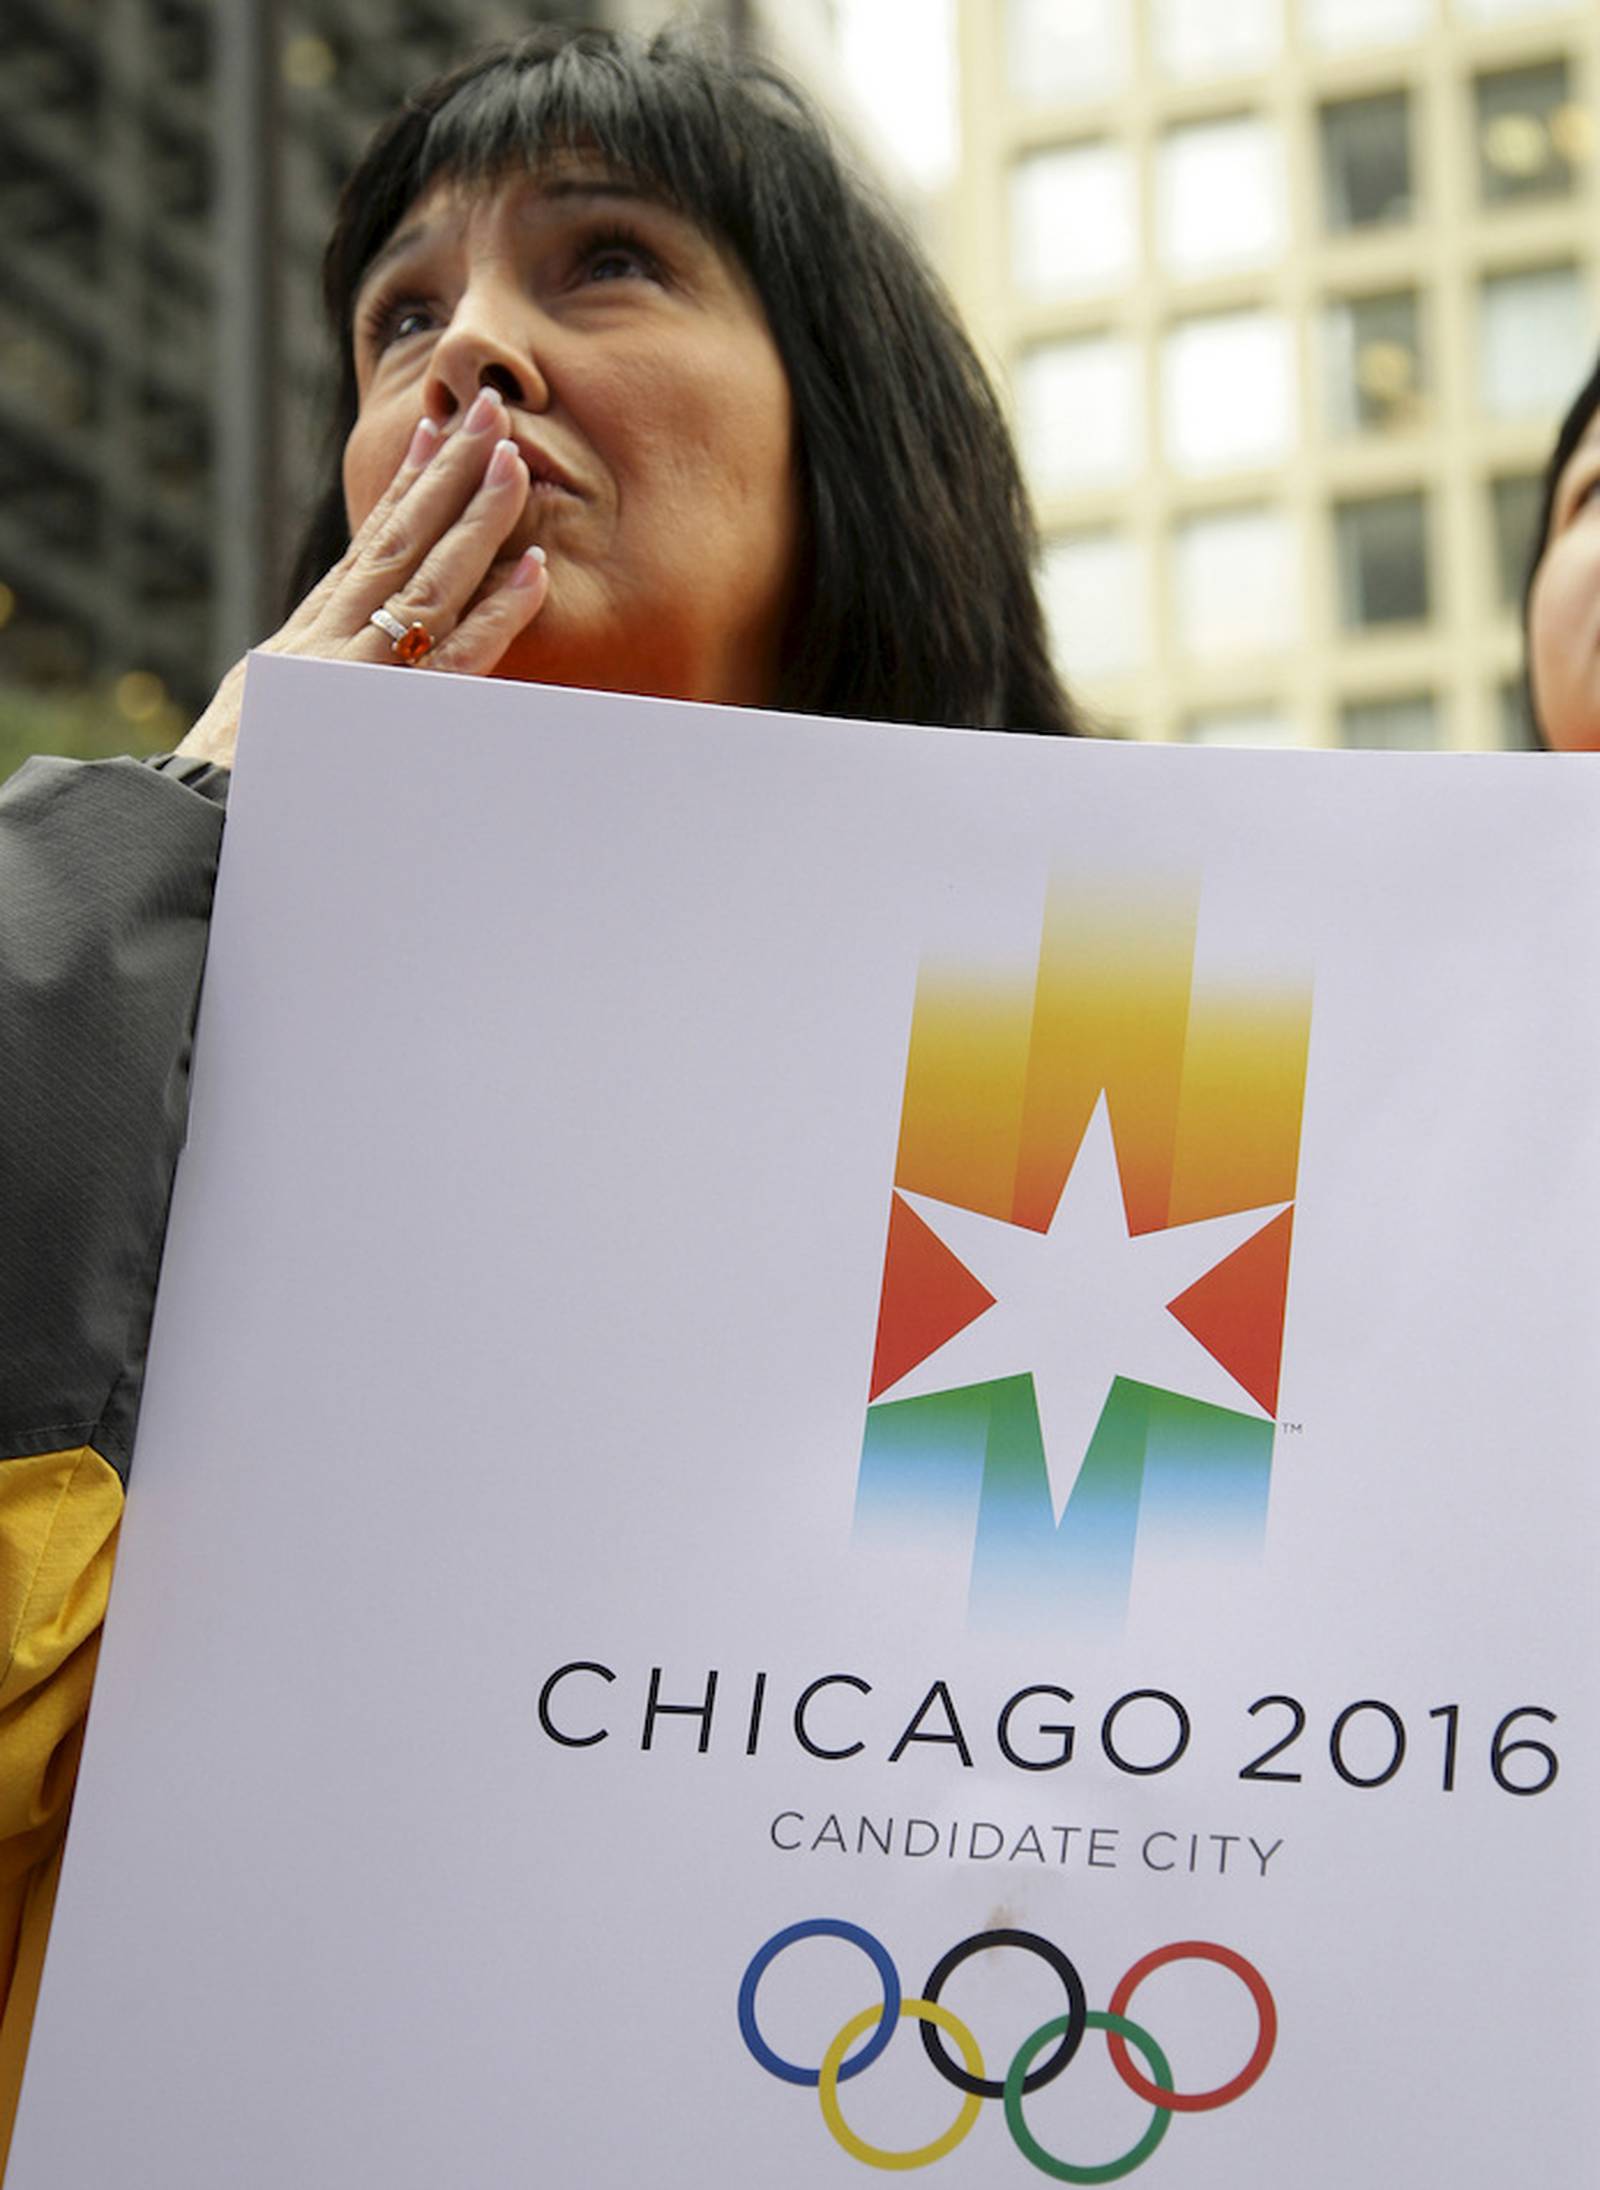 2024 Olympics host city candidates hope to learn from Chicago, USOC's